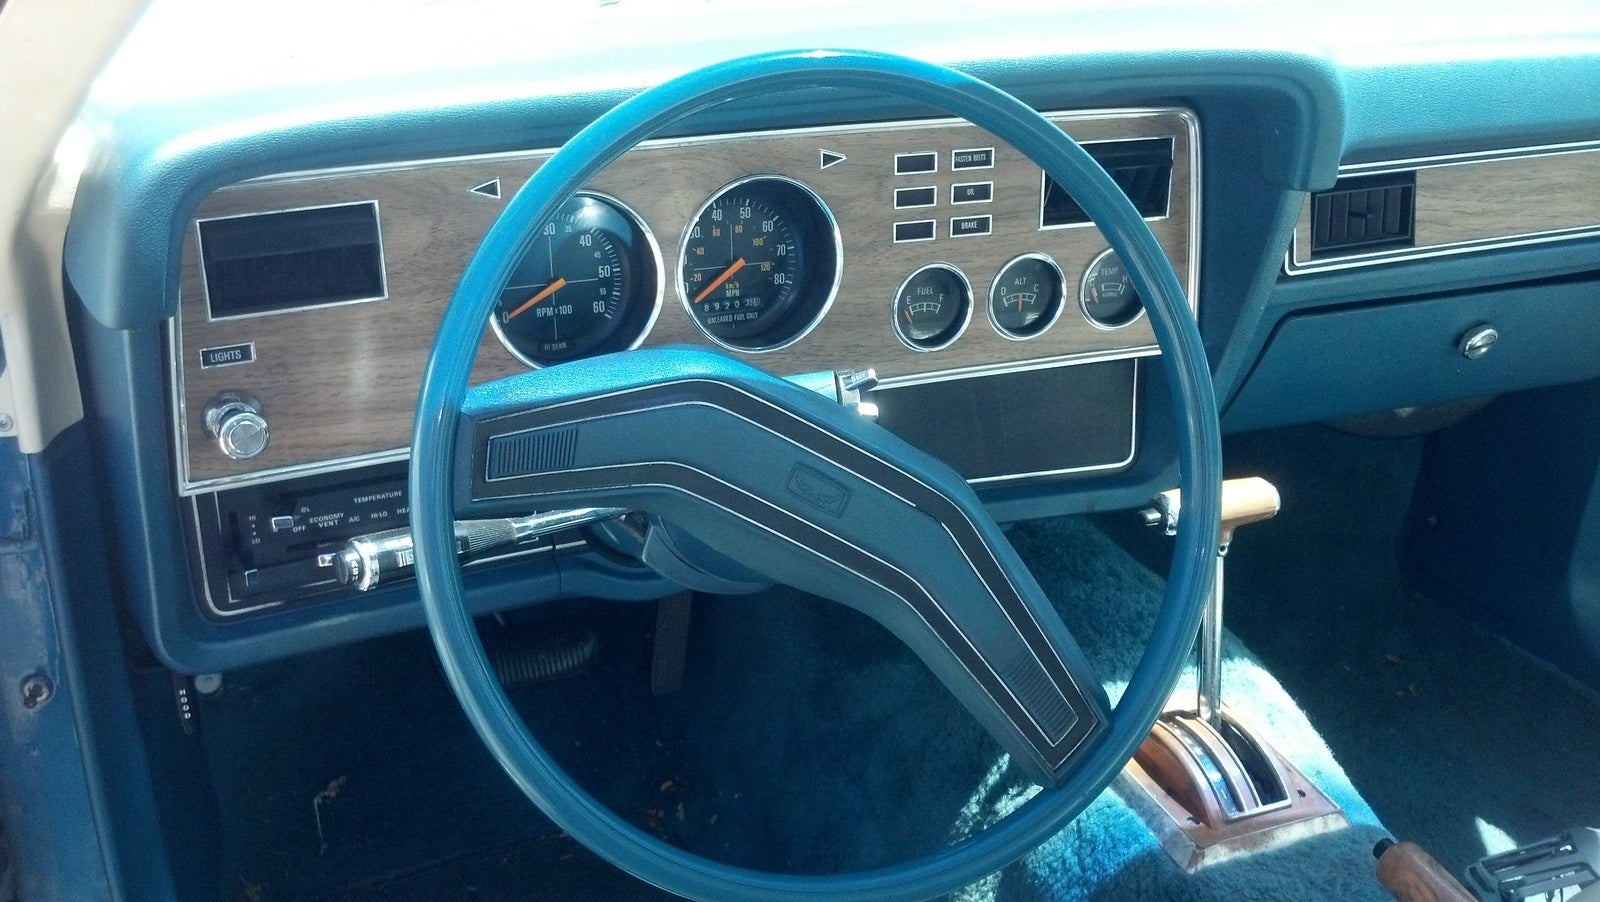 1978 Ford Mustang Ii Interior Pictures Cargurus